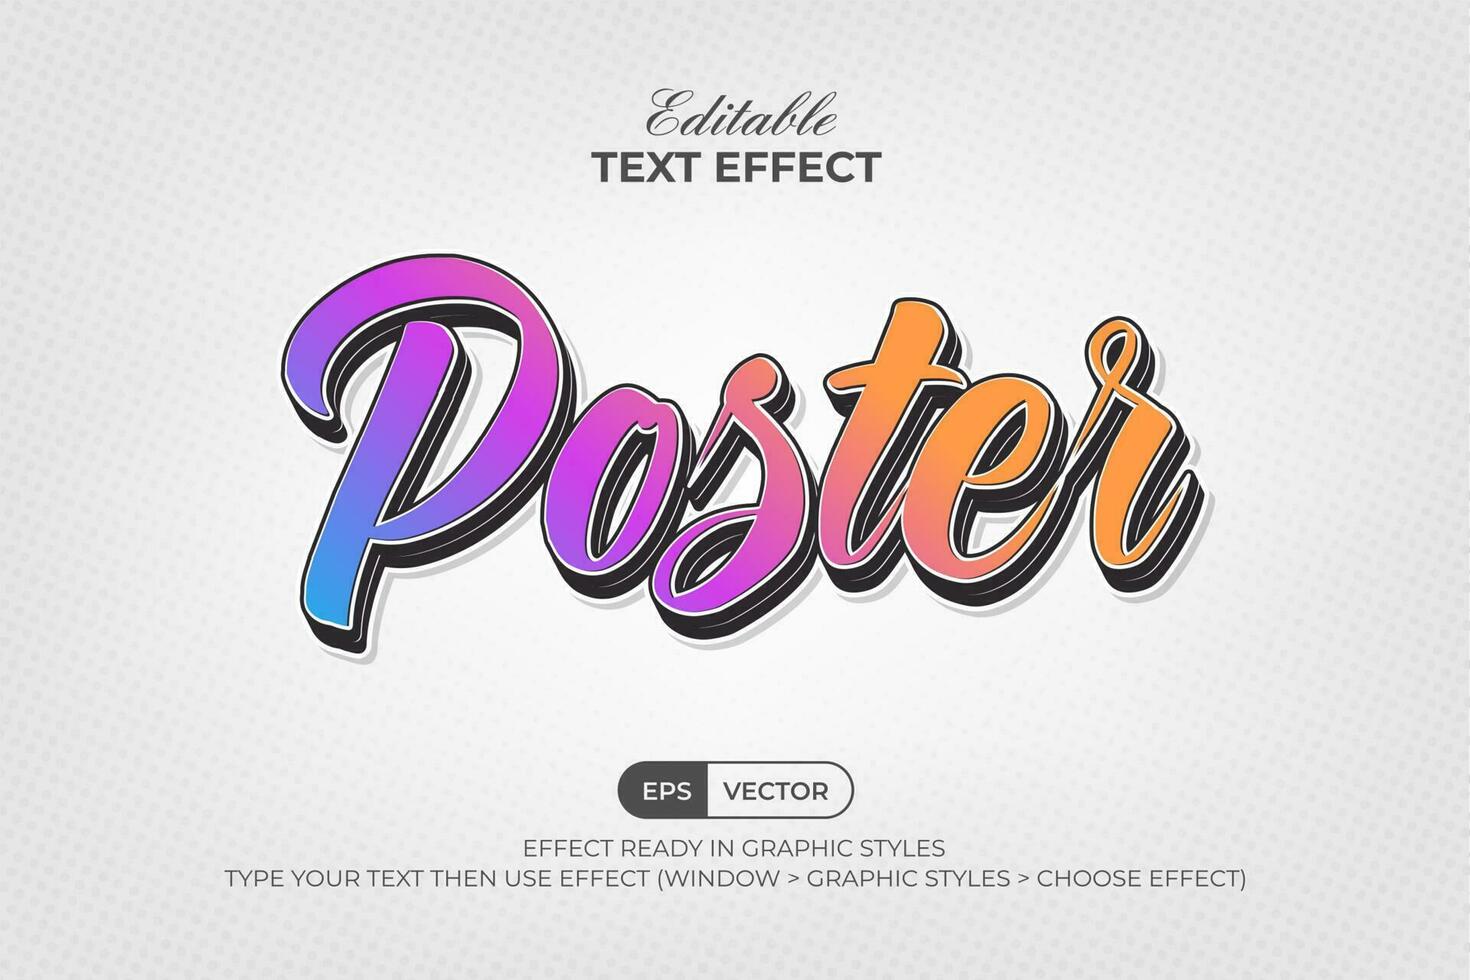 Colorful text effect poster style. Editable text effect. vector